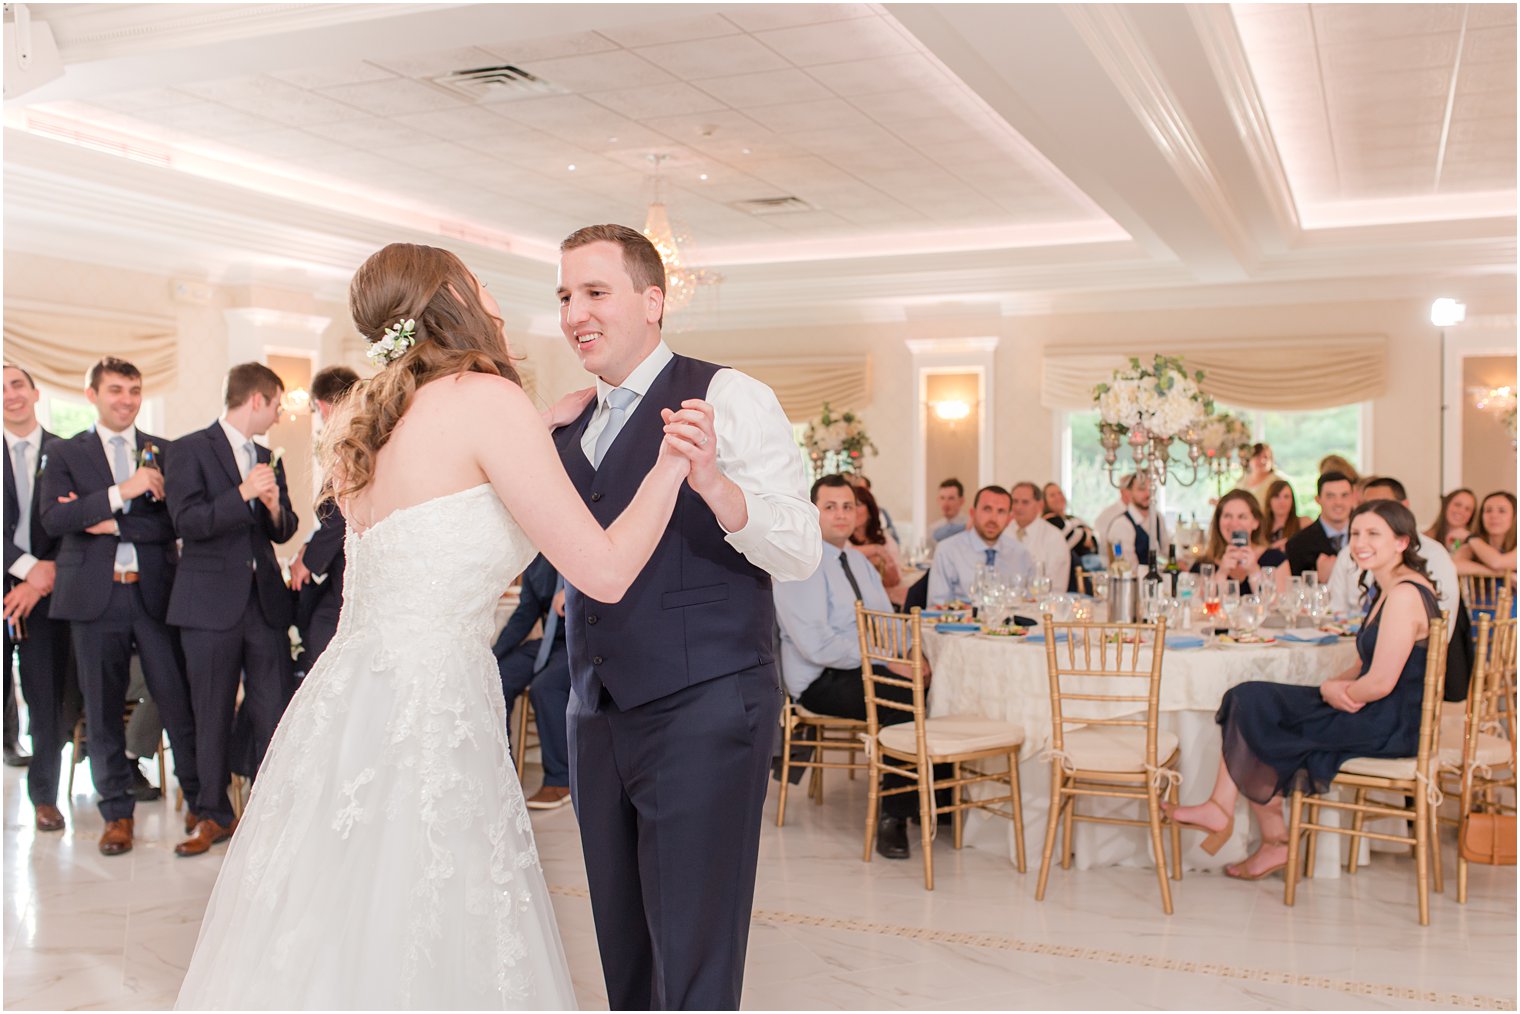 newlyweds have first dance in English Manor reception hall 